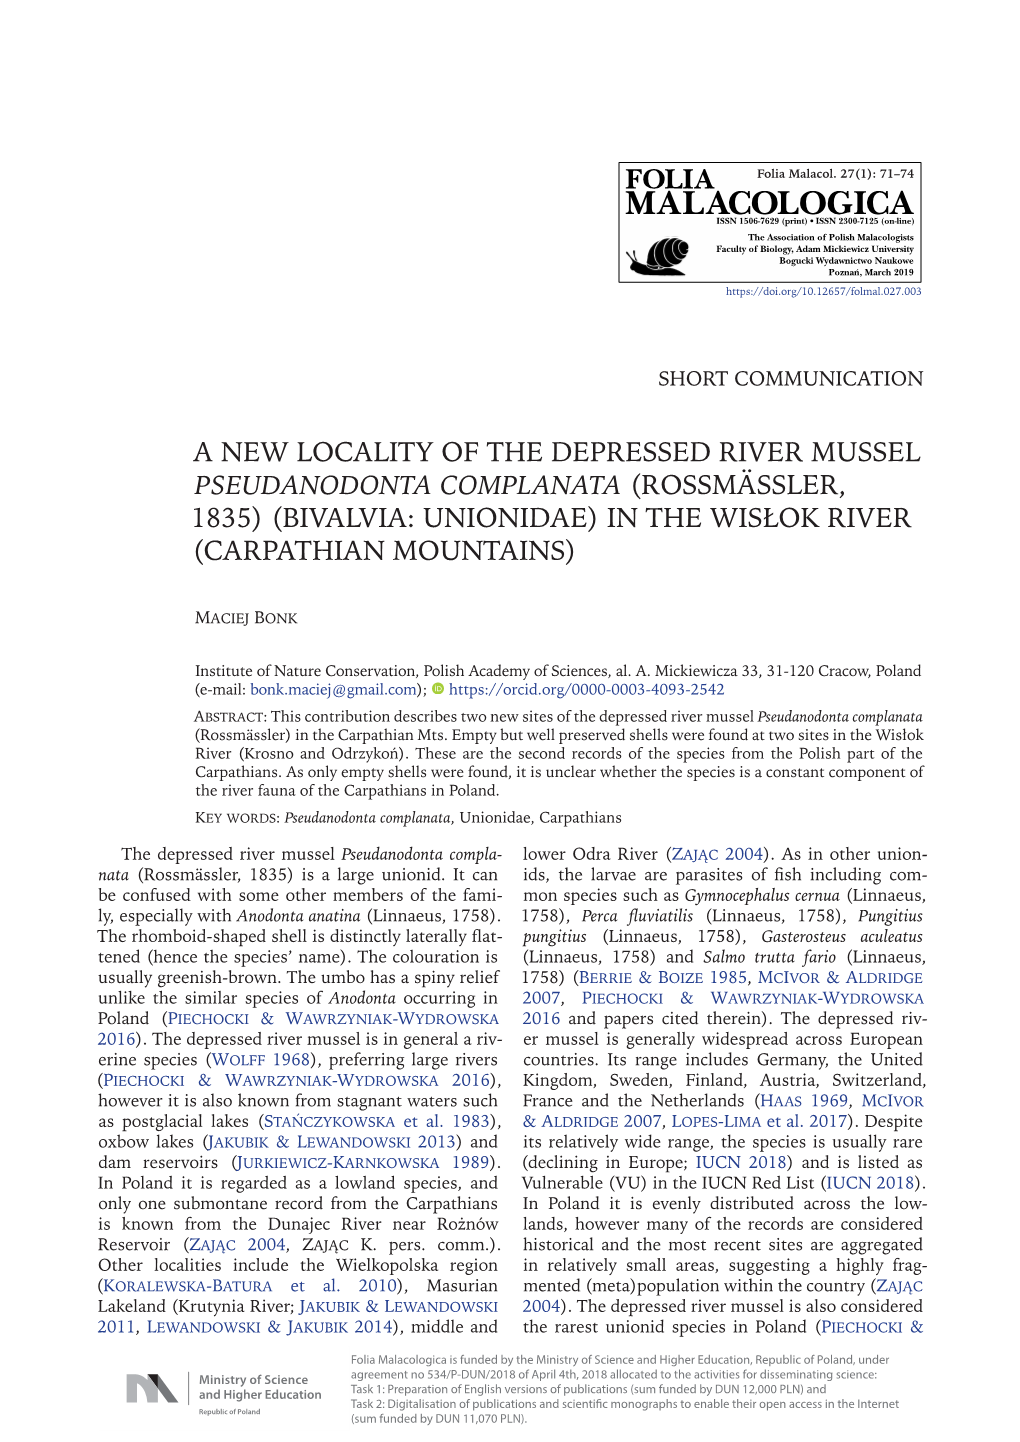 A New Locality of the Depressed River Mussel Pseudanodonta Complanata (Rossmässler, 1835) (Bivalvia: Unionidae) in the Wisłok River (Carpathian Mountains)